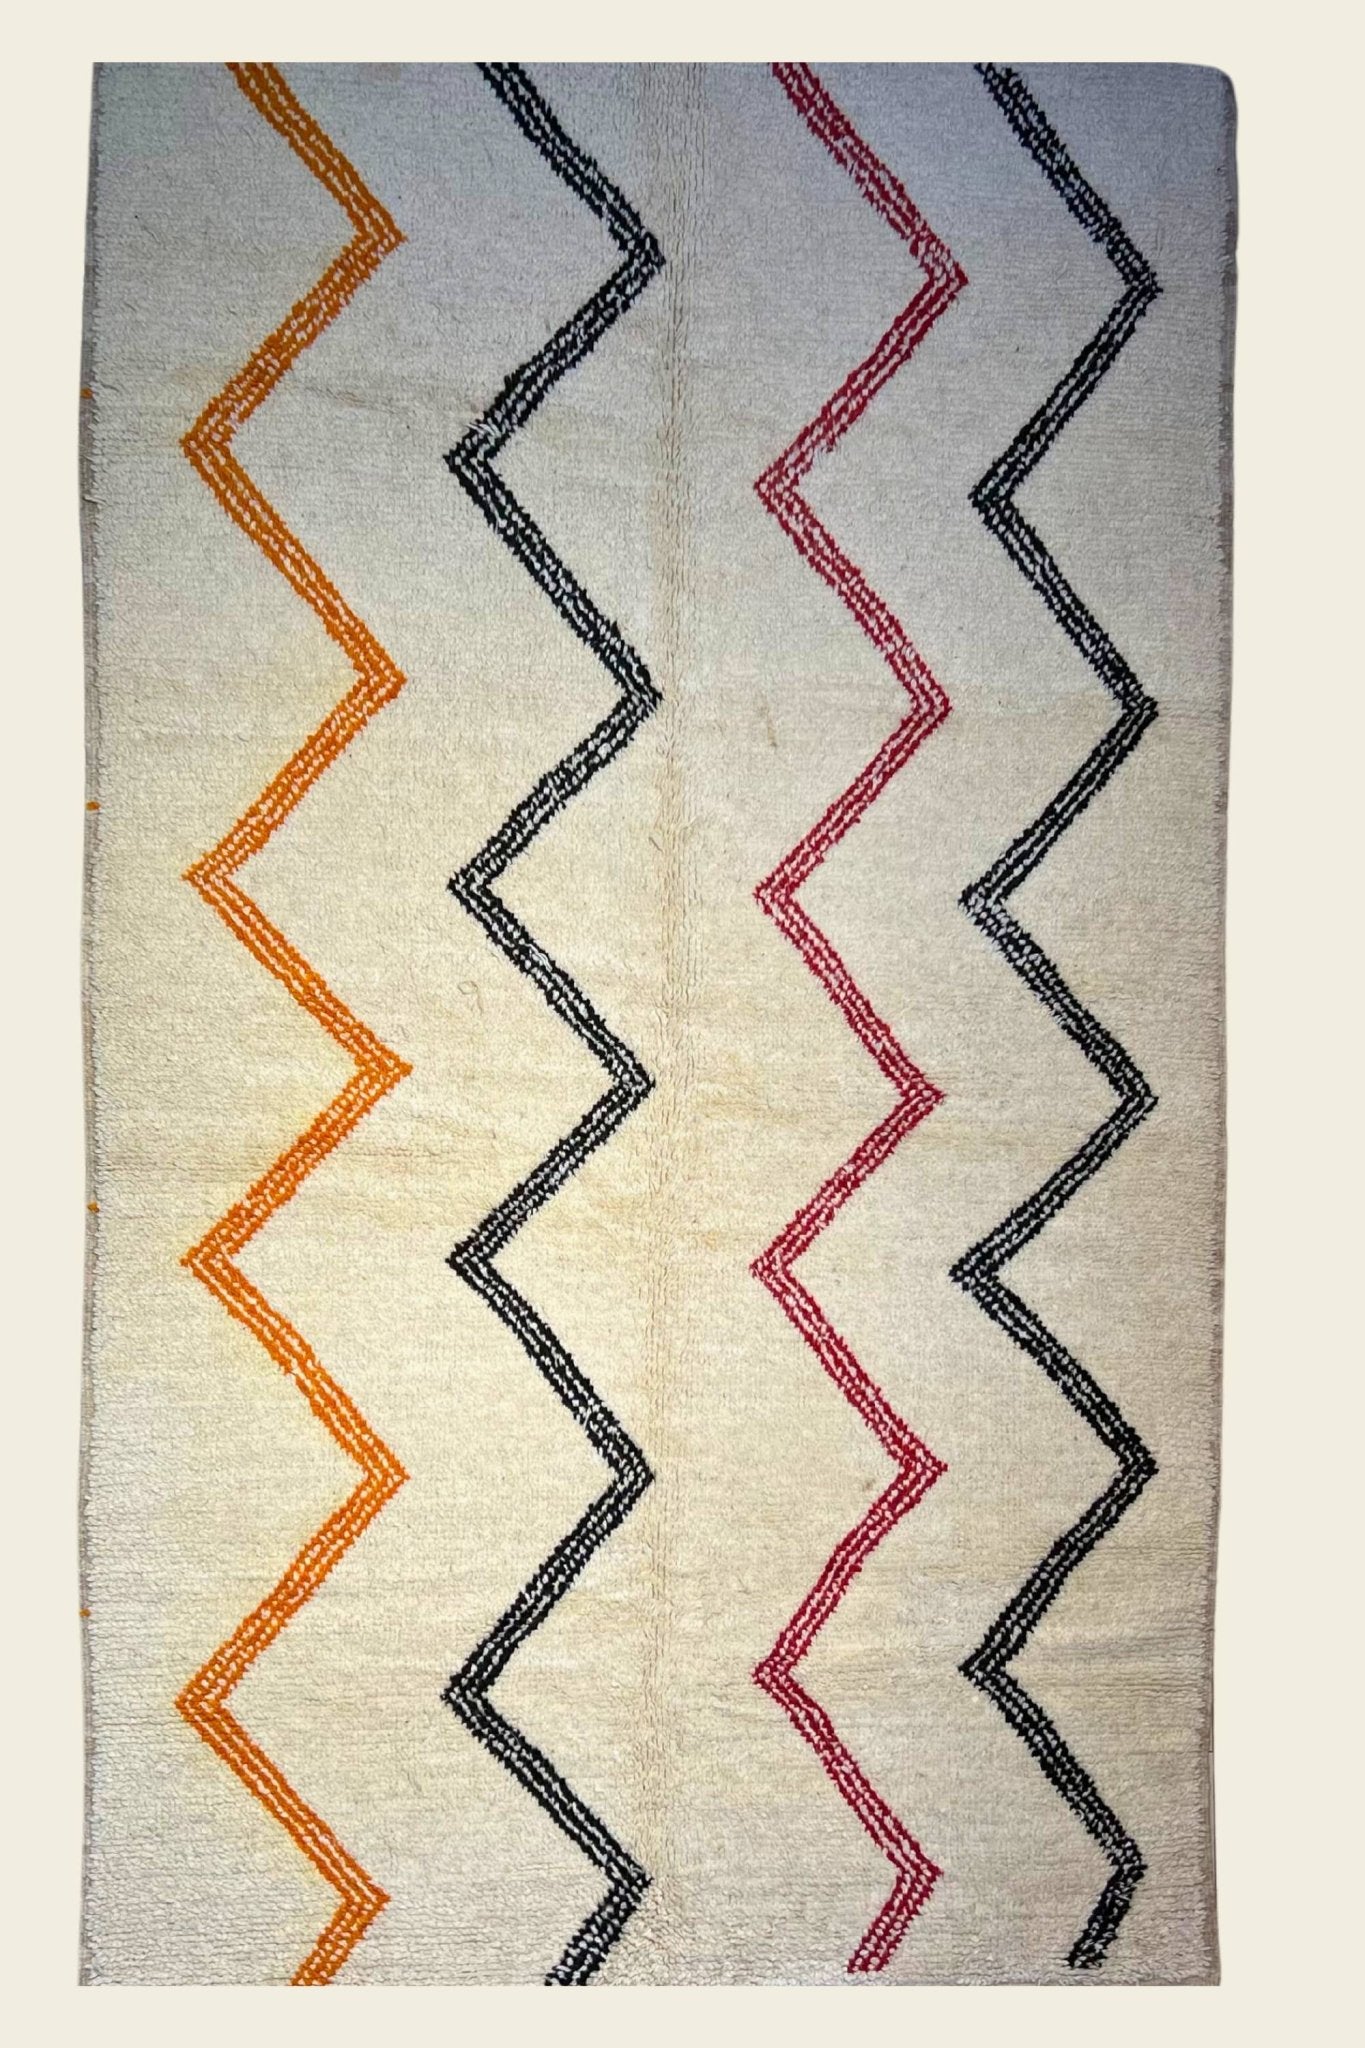 Moroccan area rug from Tazenakht, Wool and Thread, 5'1" x 8'8" Or 155 cm x 265 cm - Dar Bouchaib Marrakech